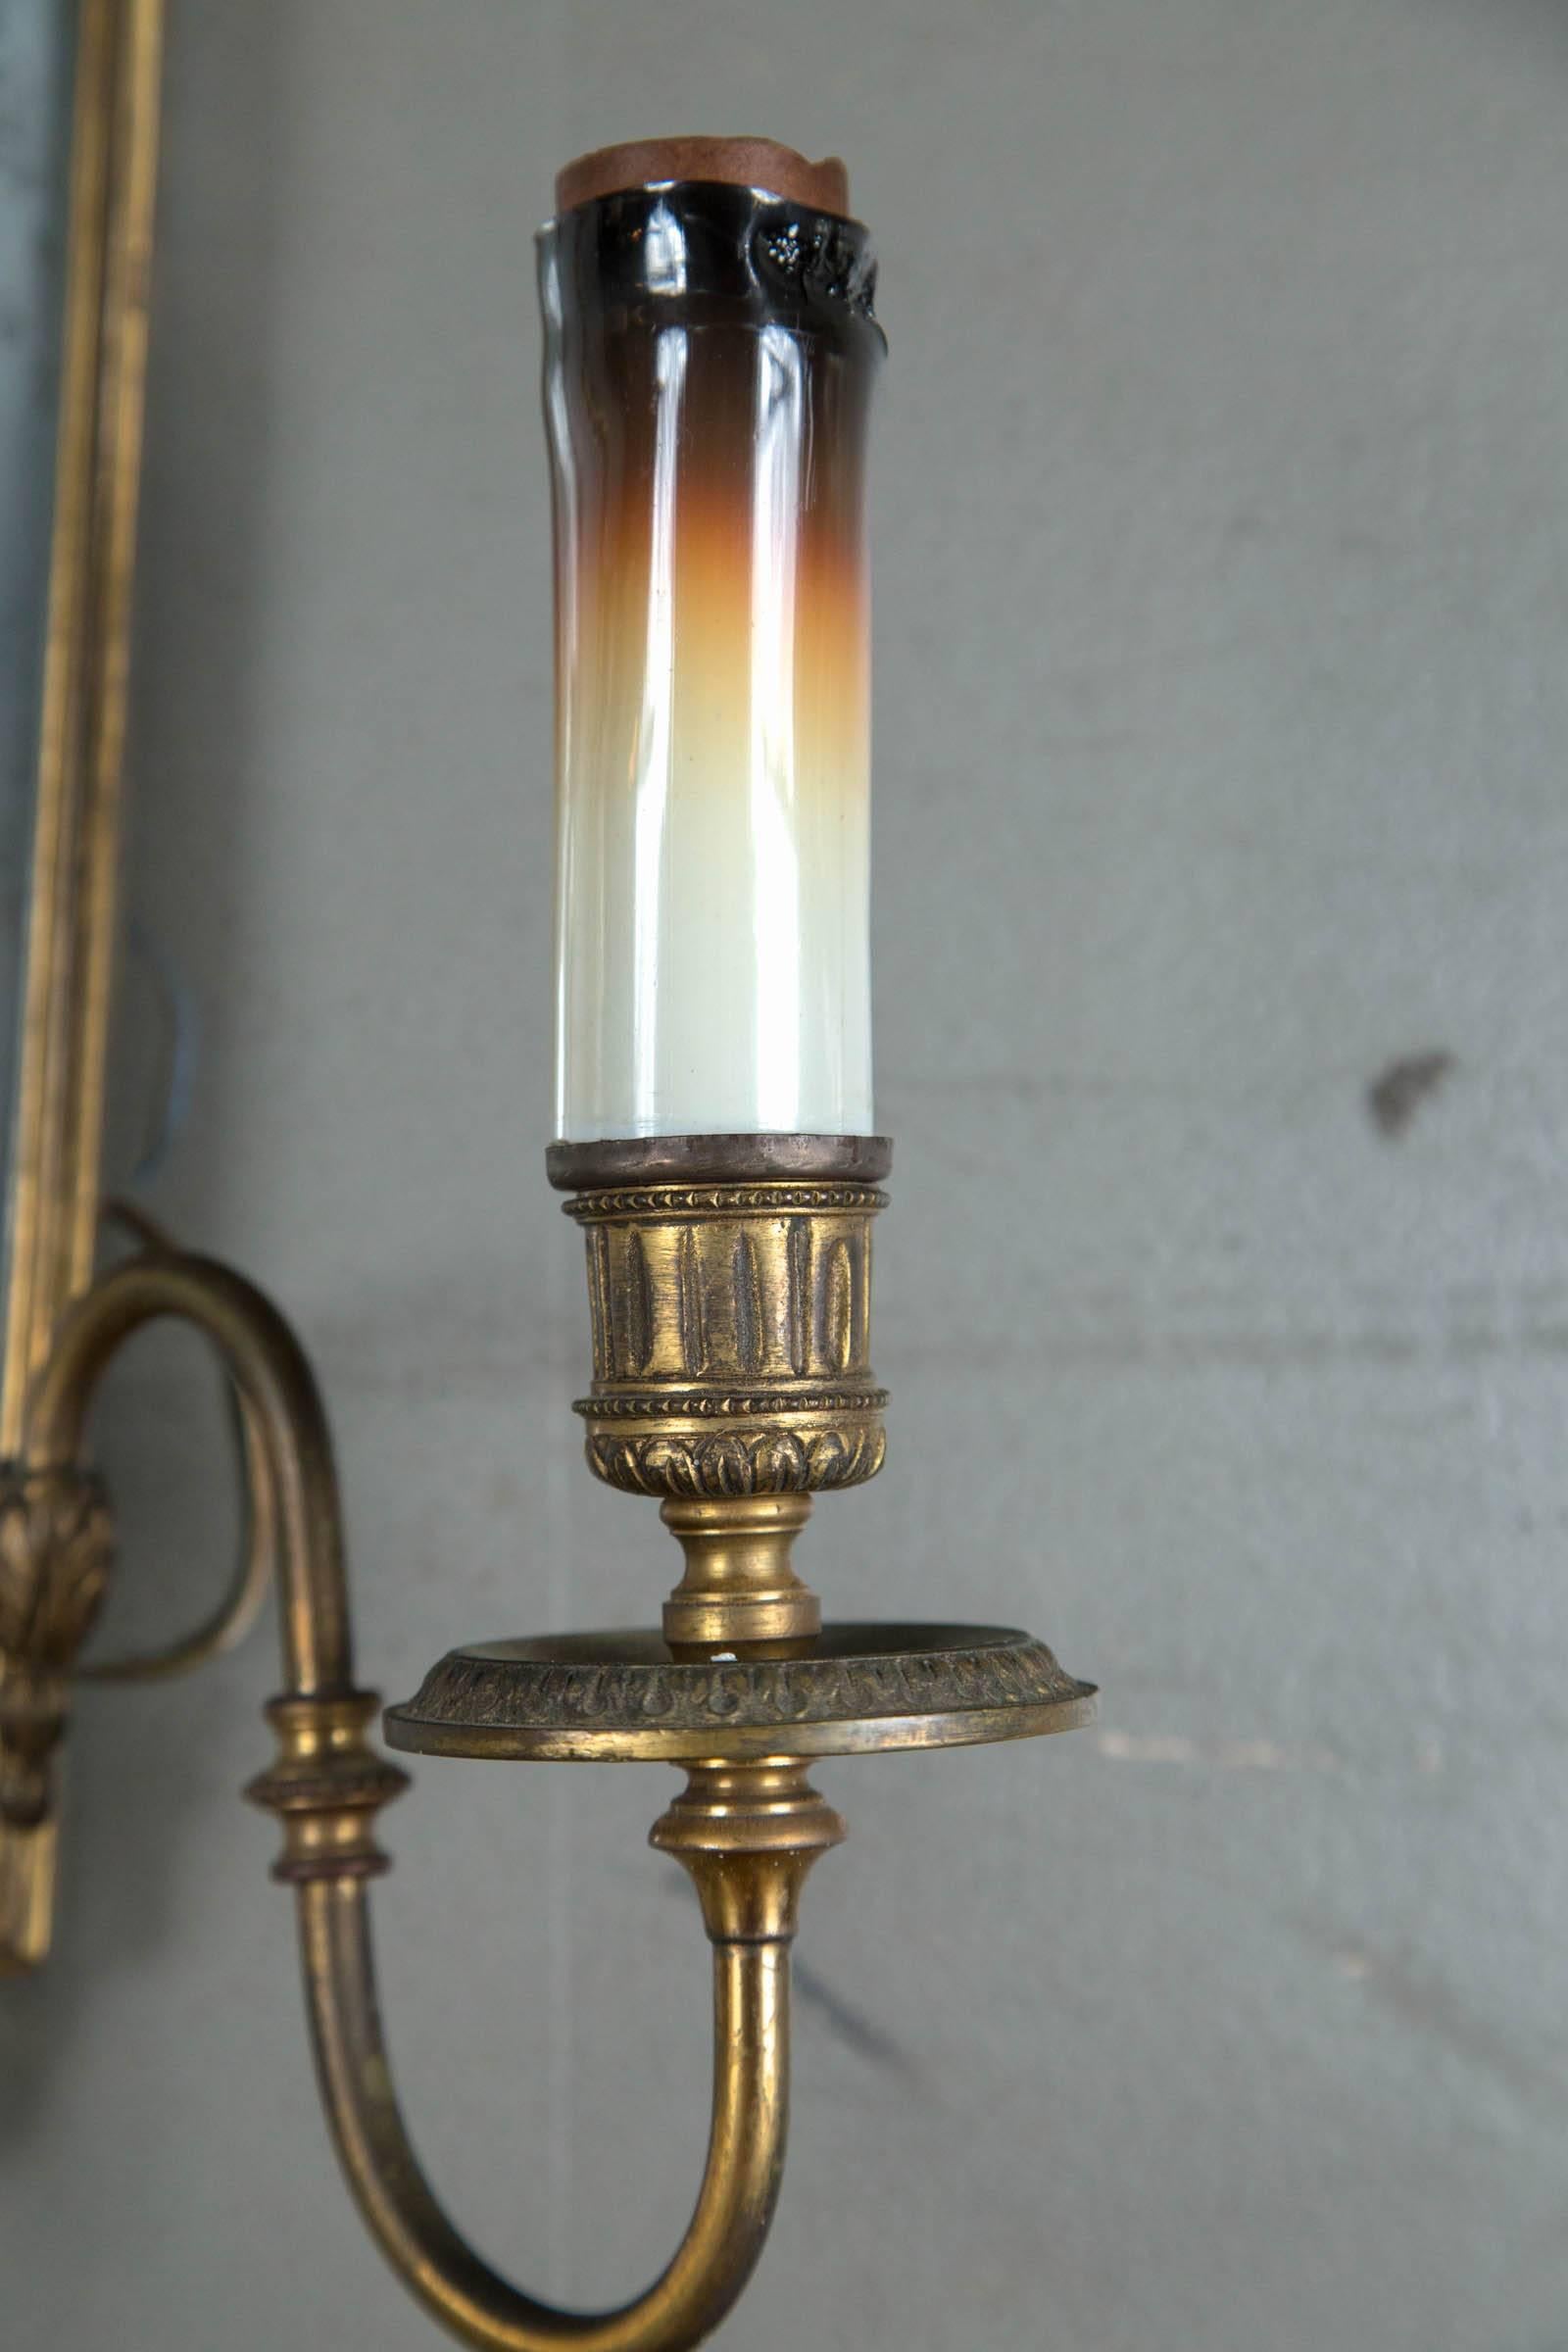 Caldwell Double Light Sconces In Excellent Condition For Sale In Stamford, CT